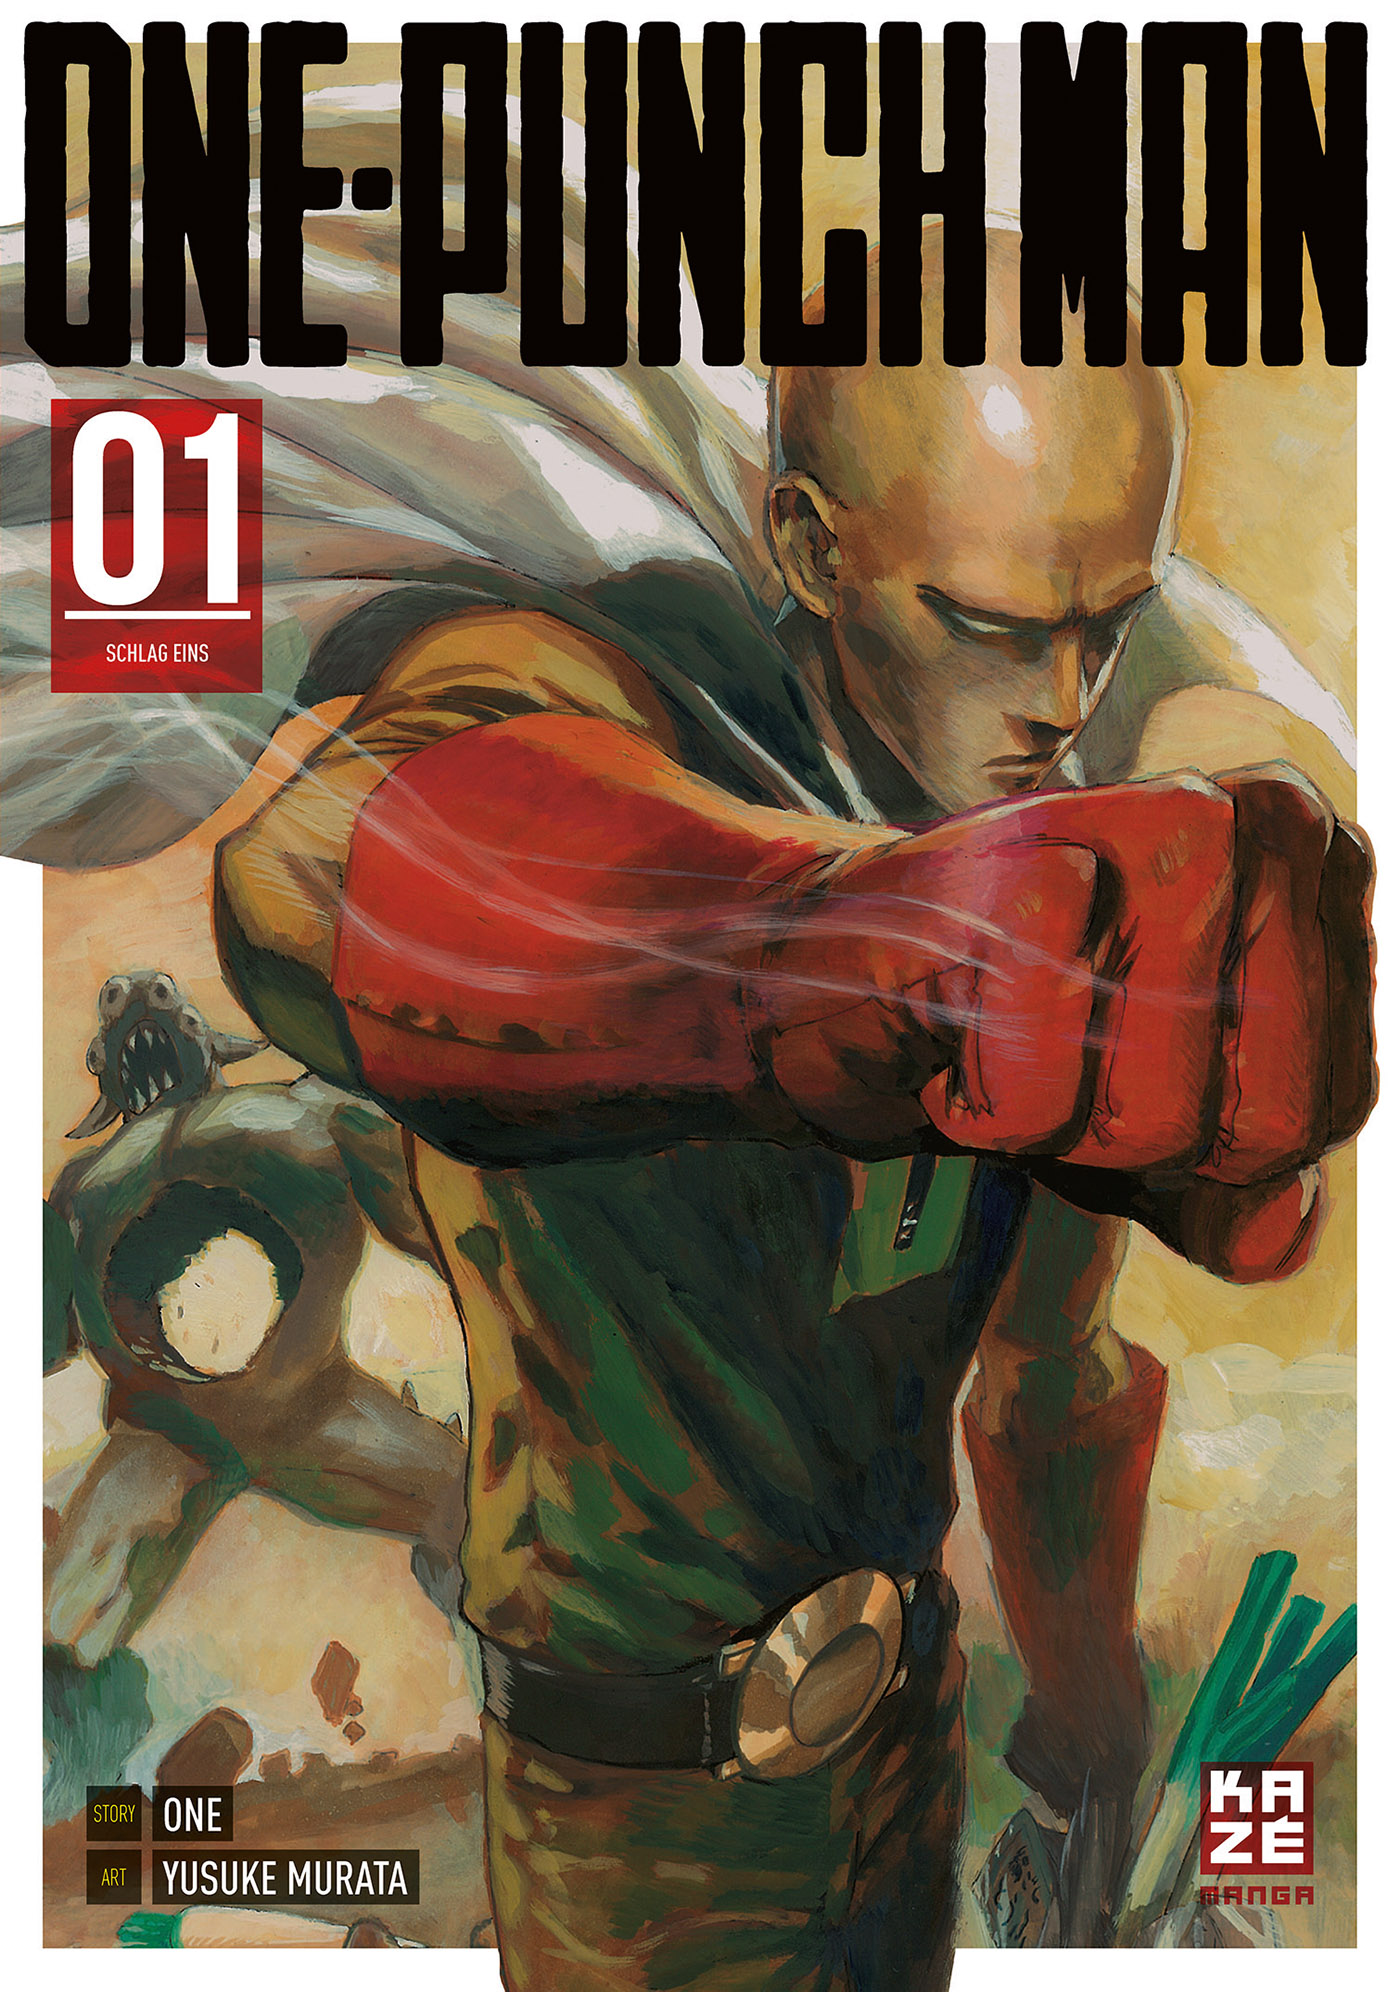 1 Band Man - One-Punch